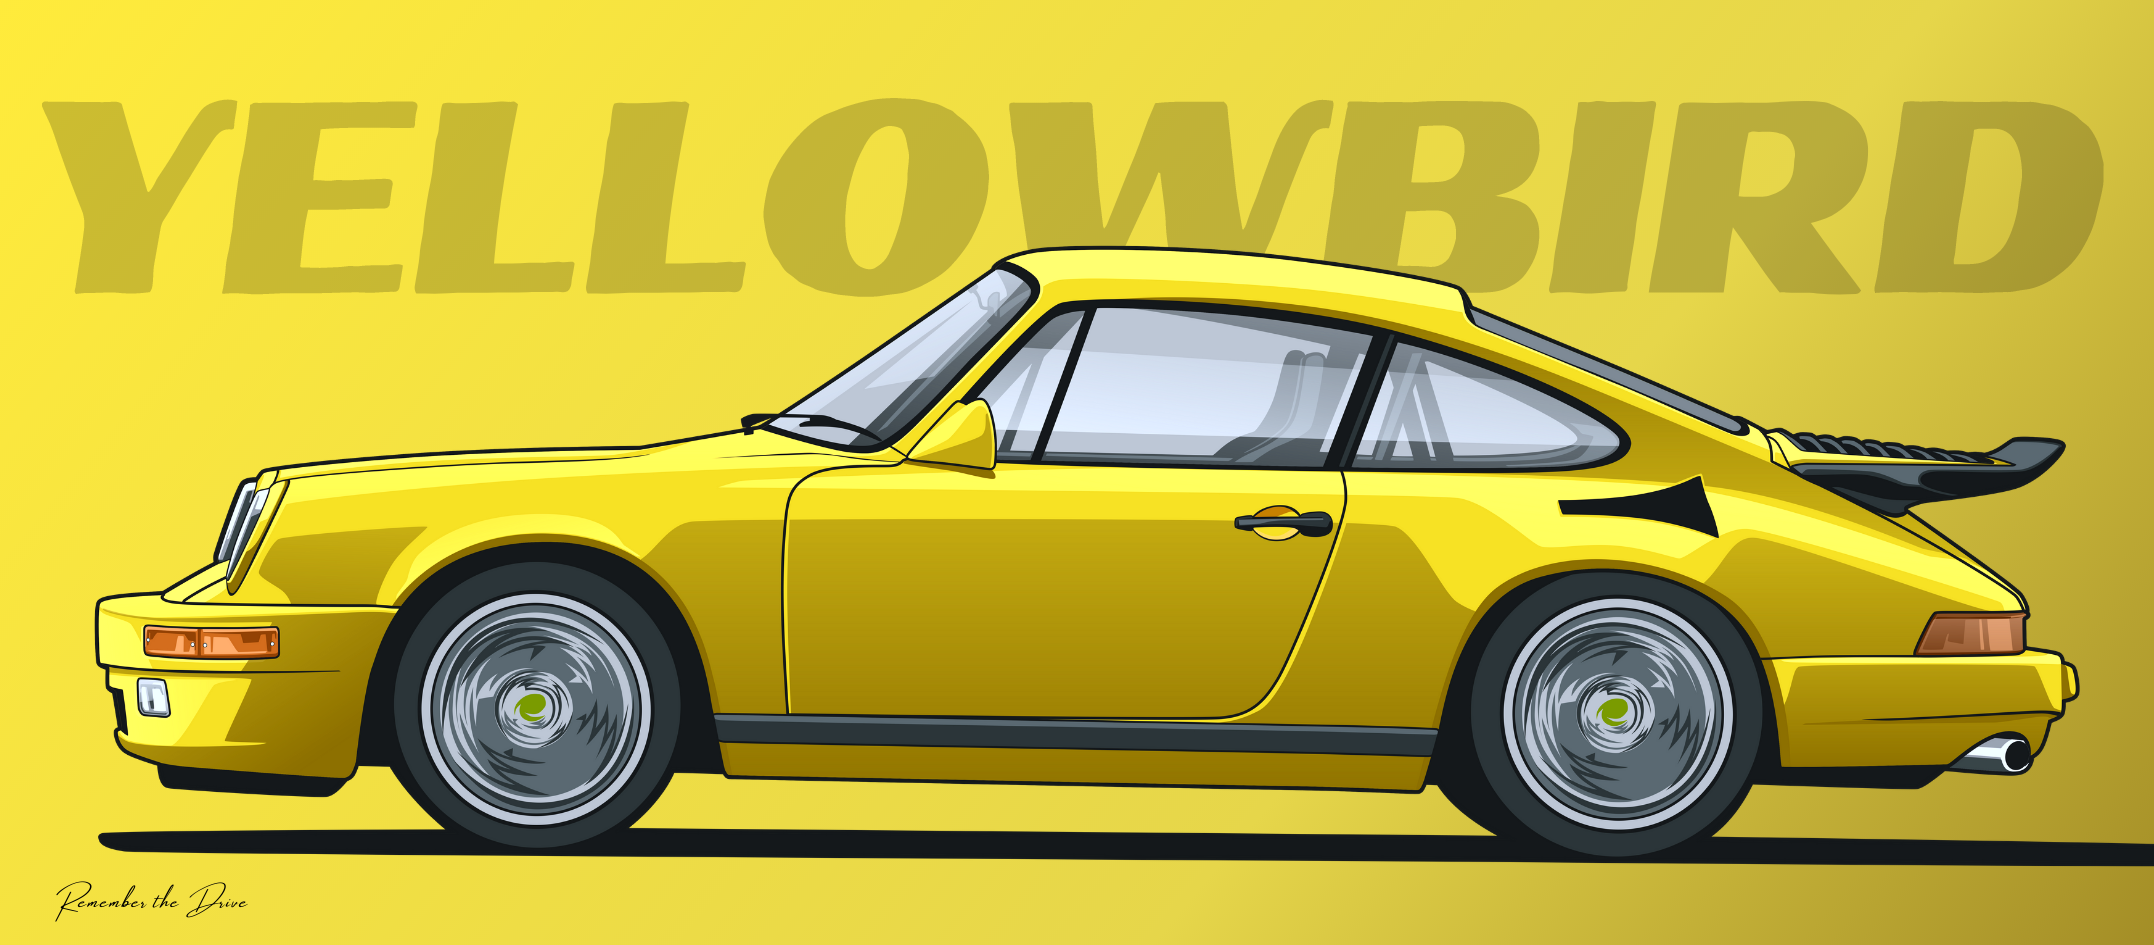 Can I have feedback on this Ruf Yellowbird poster I’m working on? What would you change?